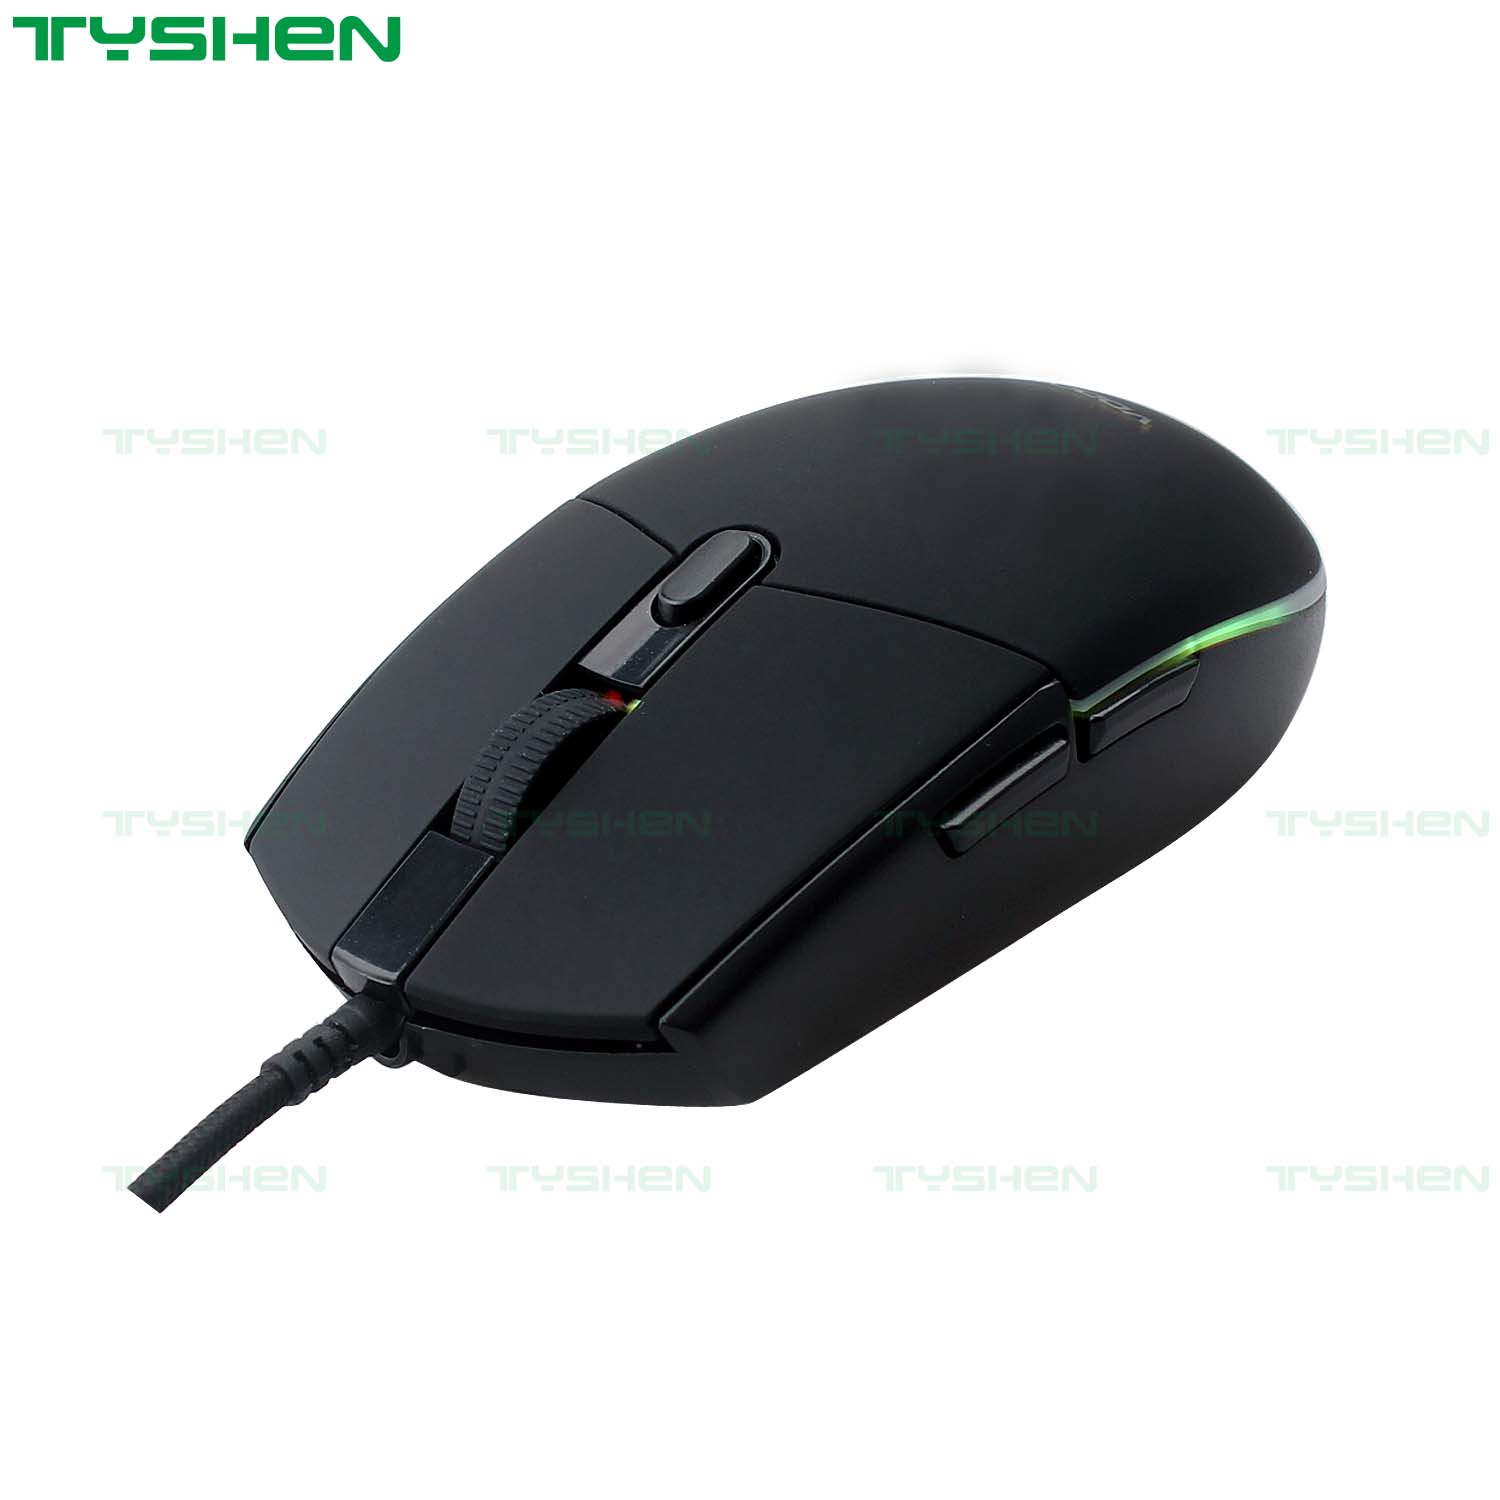 Factory OEM Cheapest Computer Optical Colored 6D 6 Button USB Wired Gaming Mouse